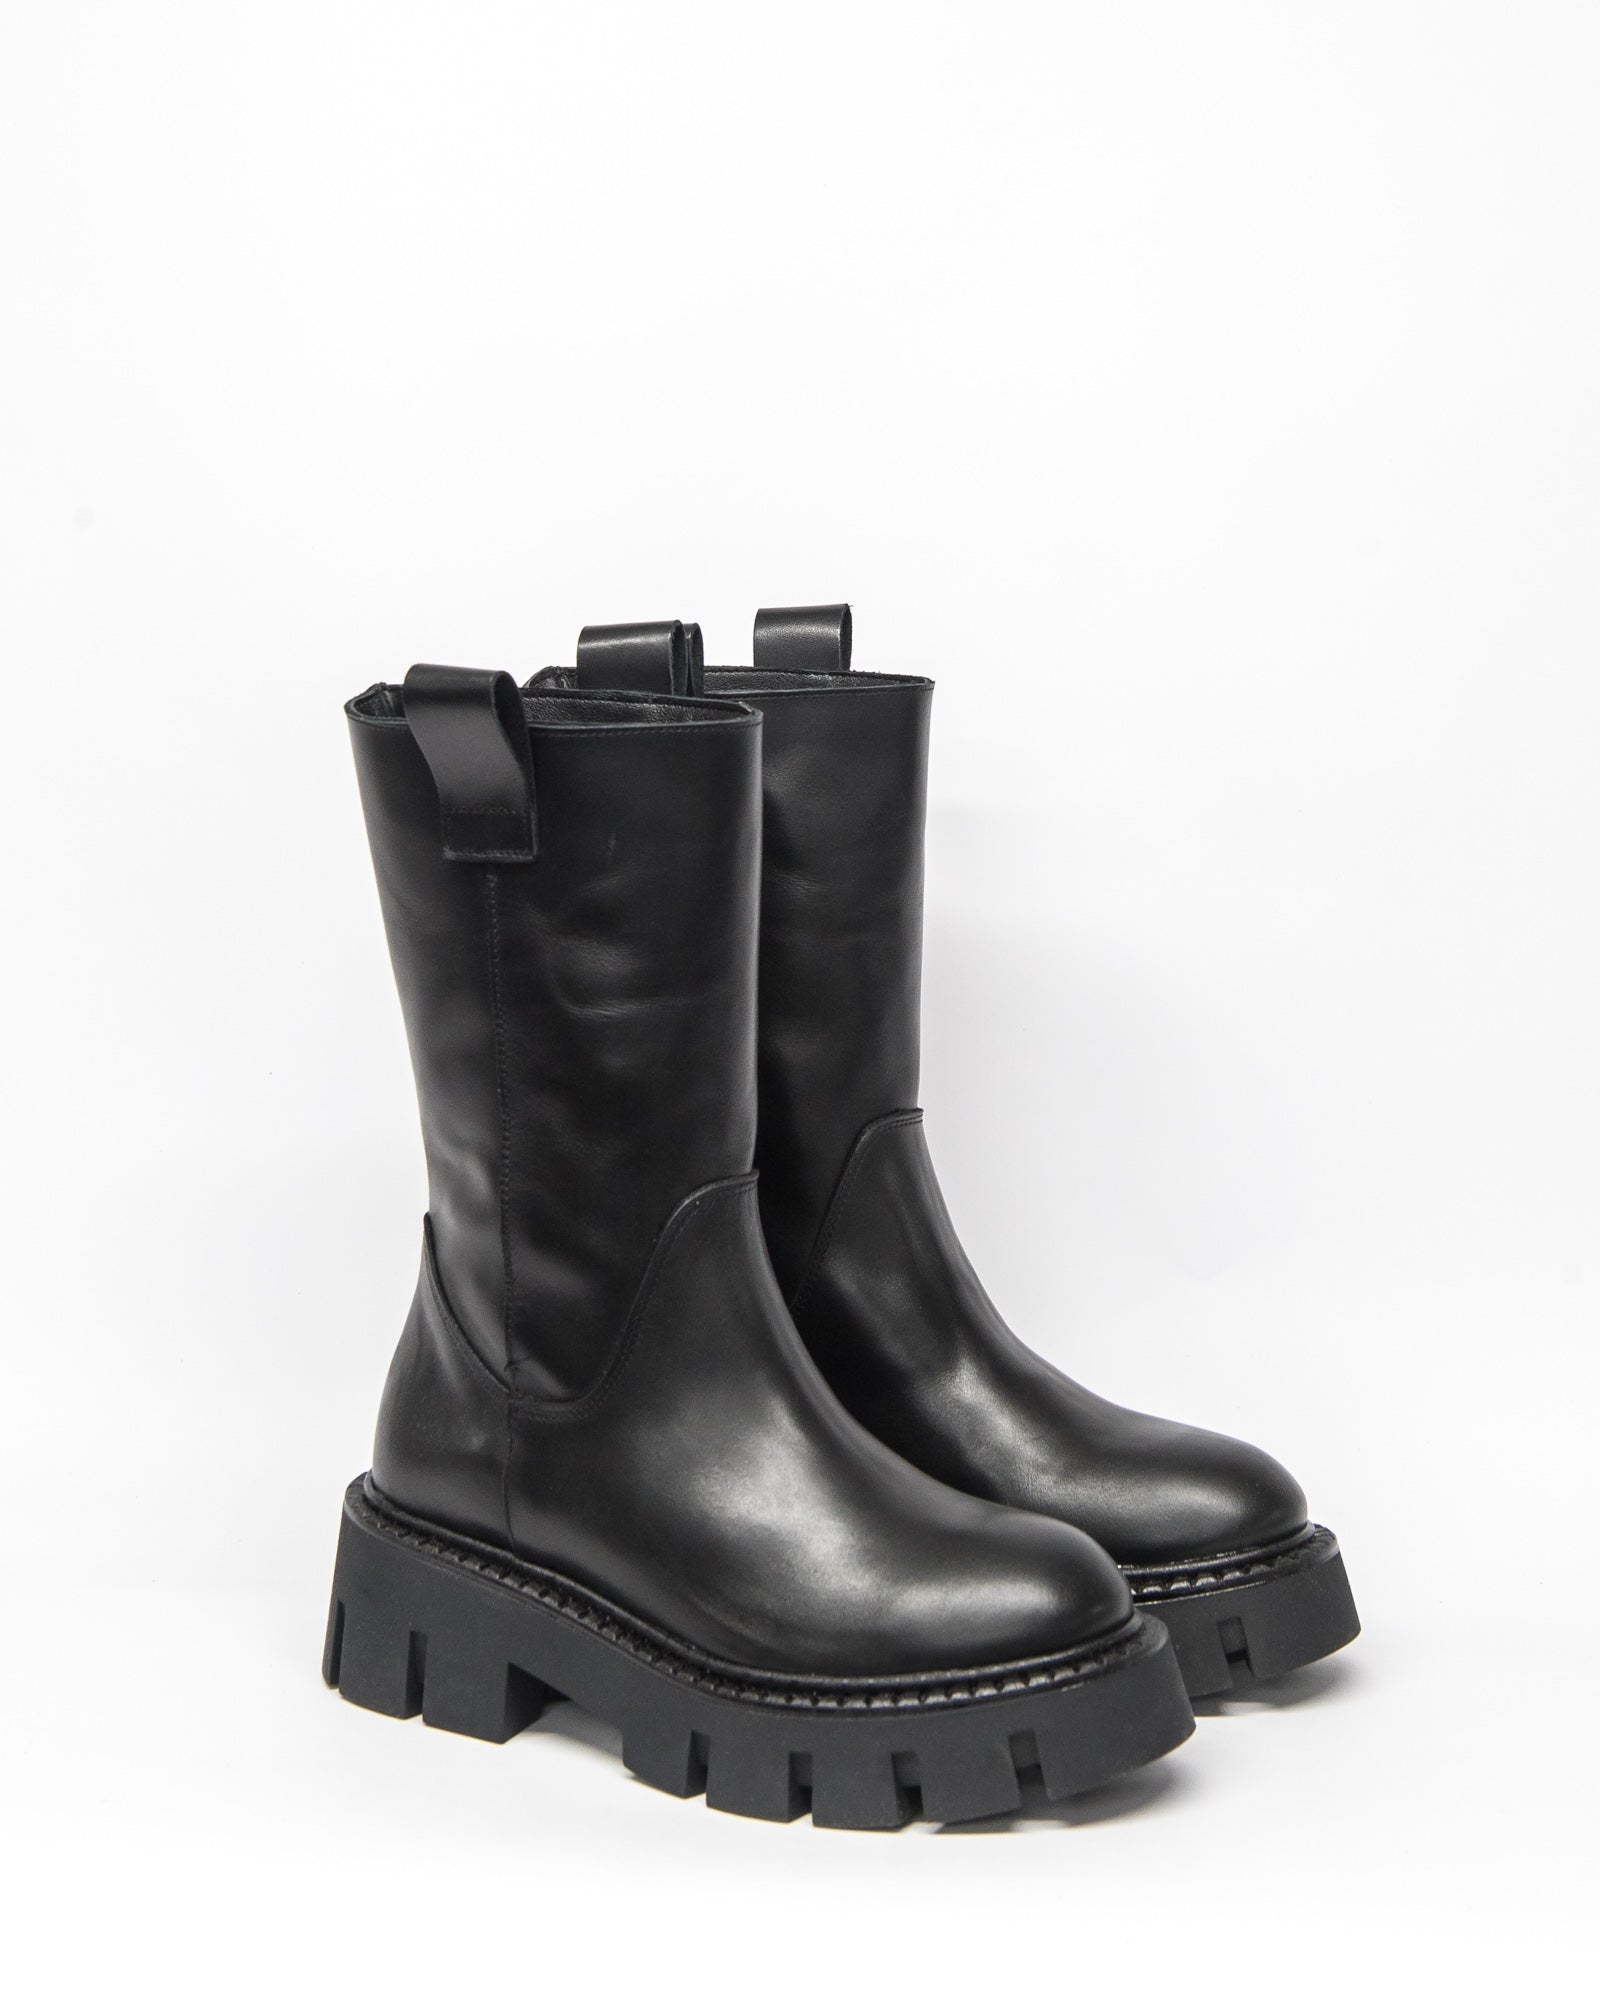 aside boot - black leather